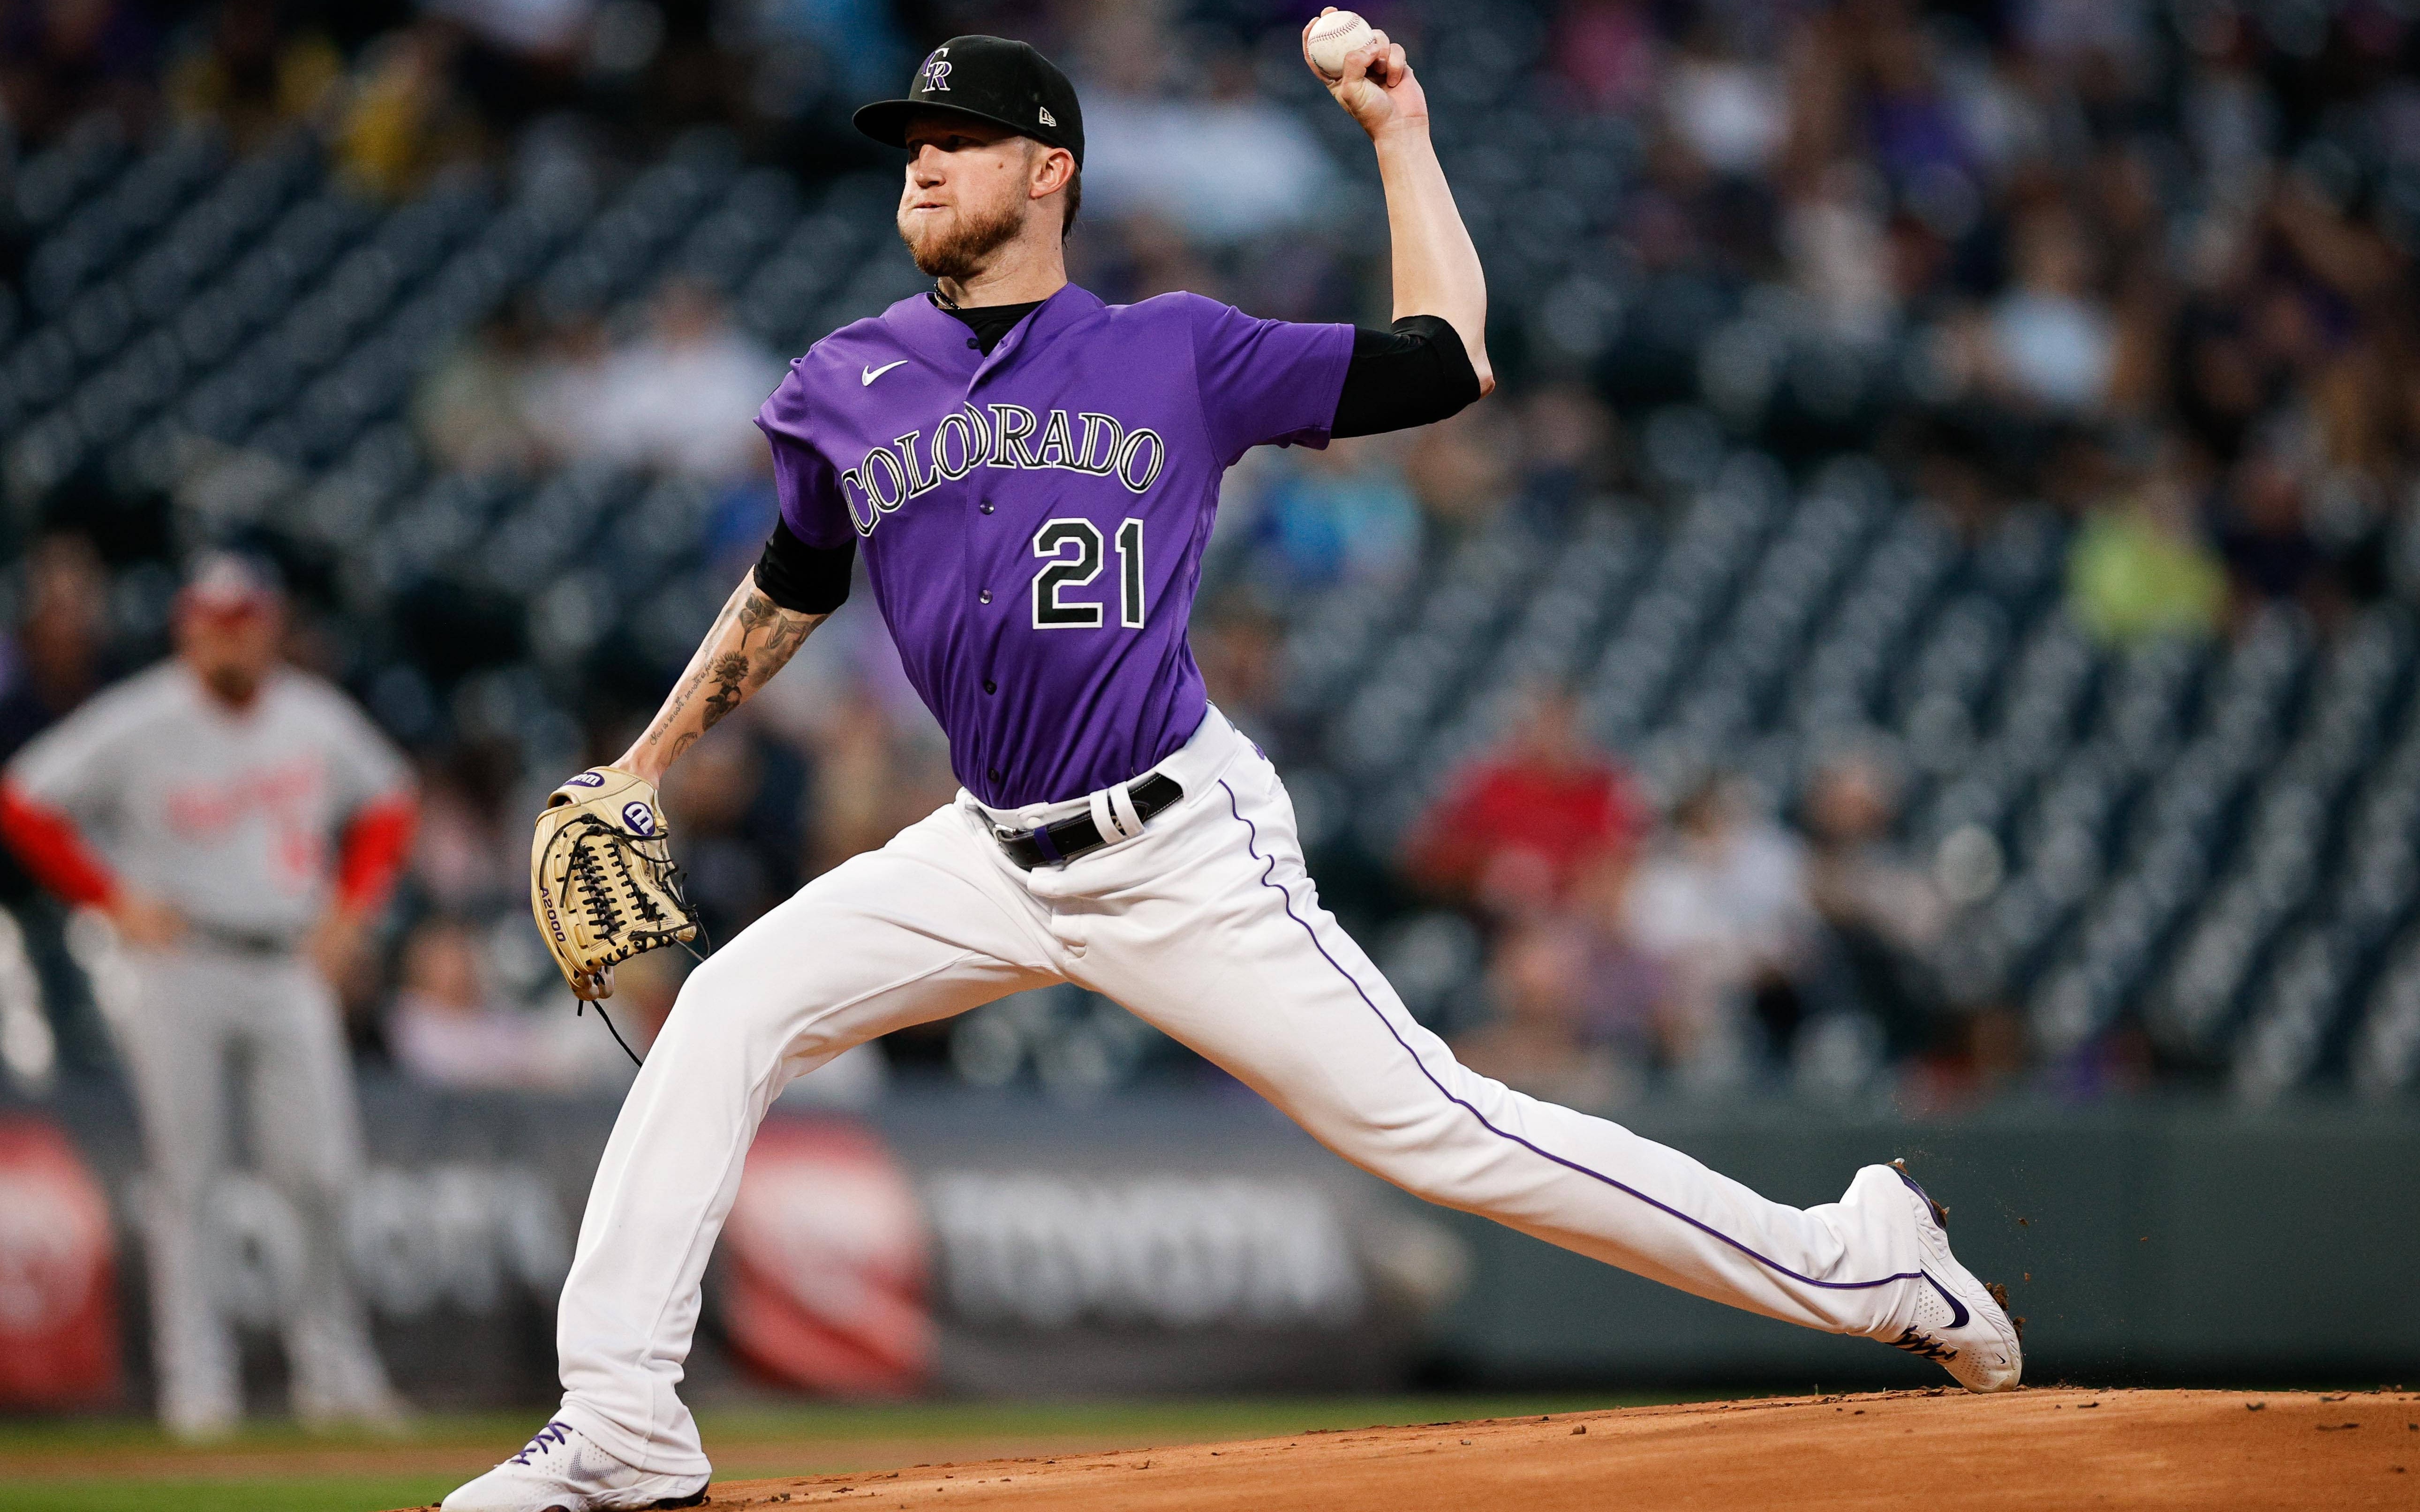 Kyle Freeland pitches. Credit: Isaiah J. Downing USA TODAY Sports.